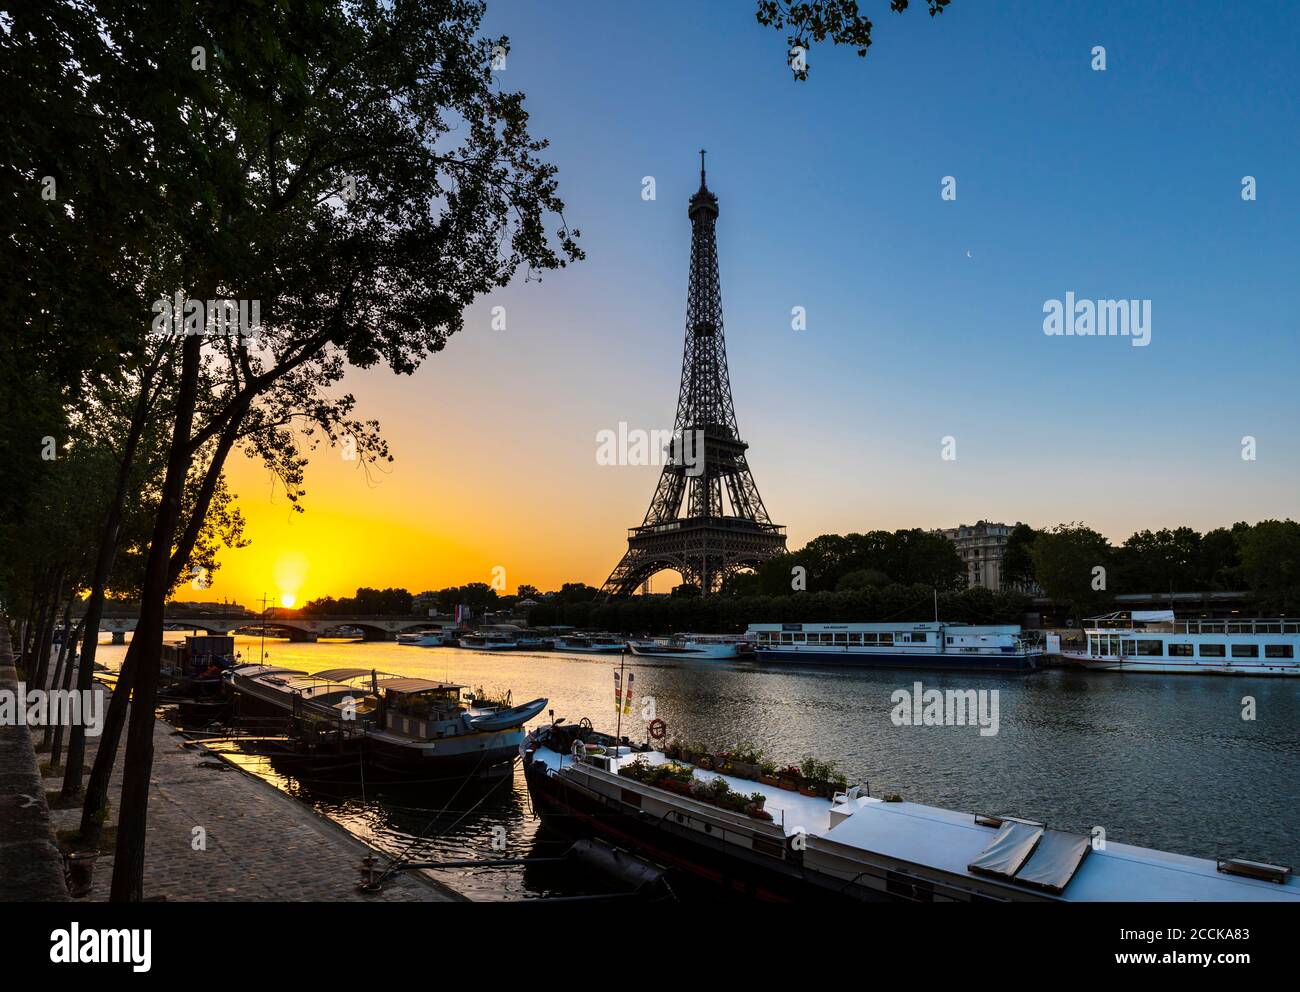 Eiffel Tower by Seine river against clear blue sky during sunrise, Paris, France Stock Photo